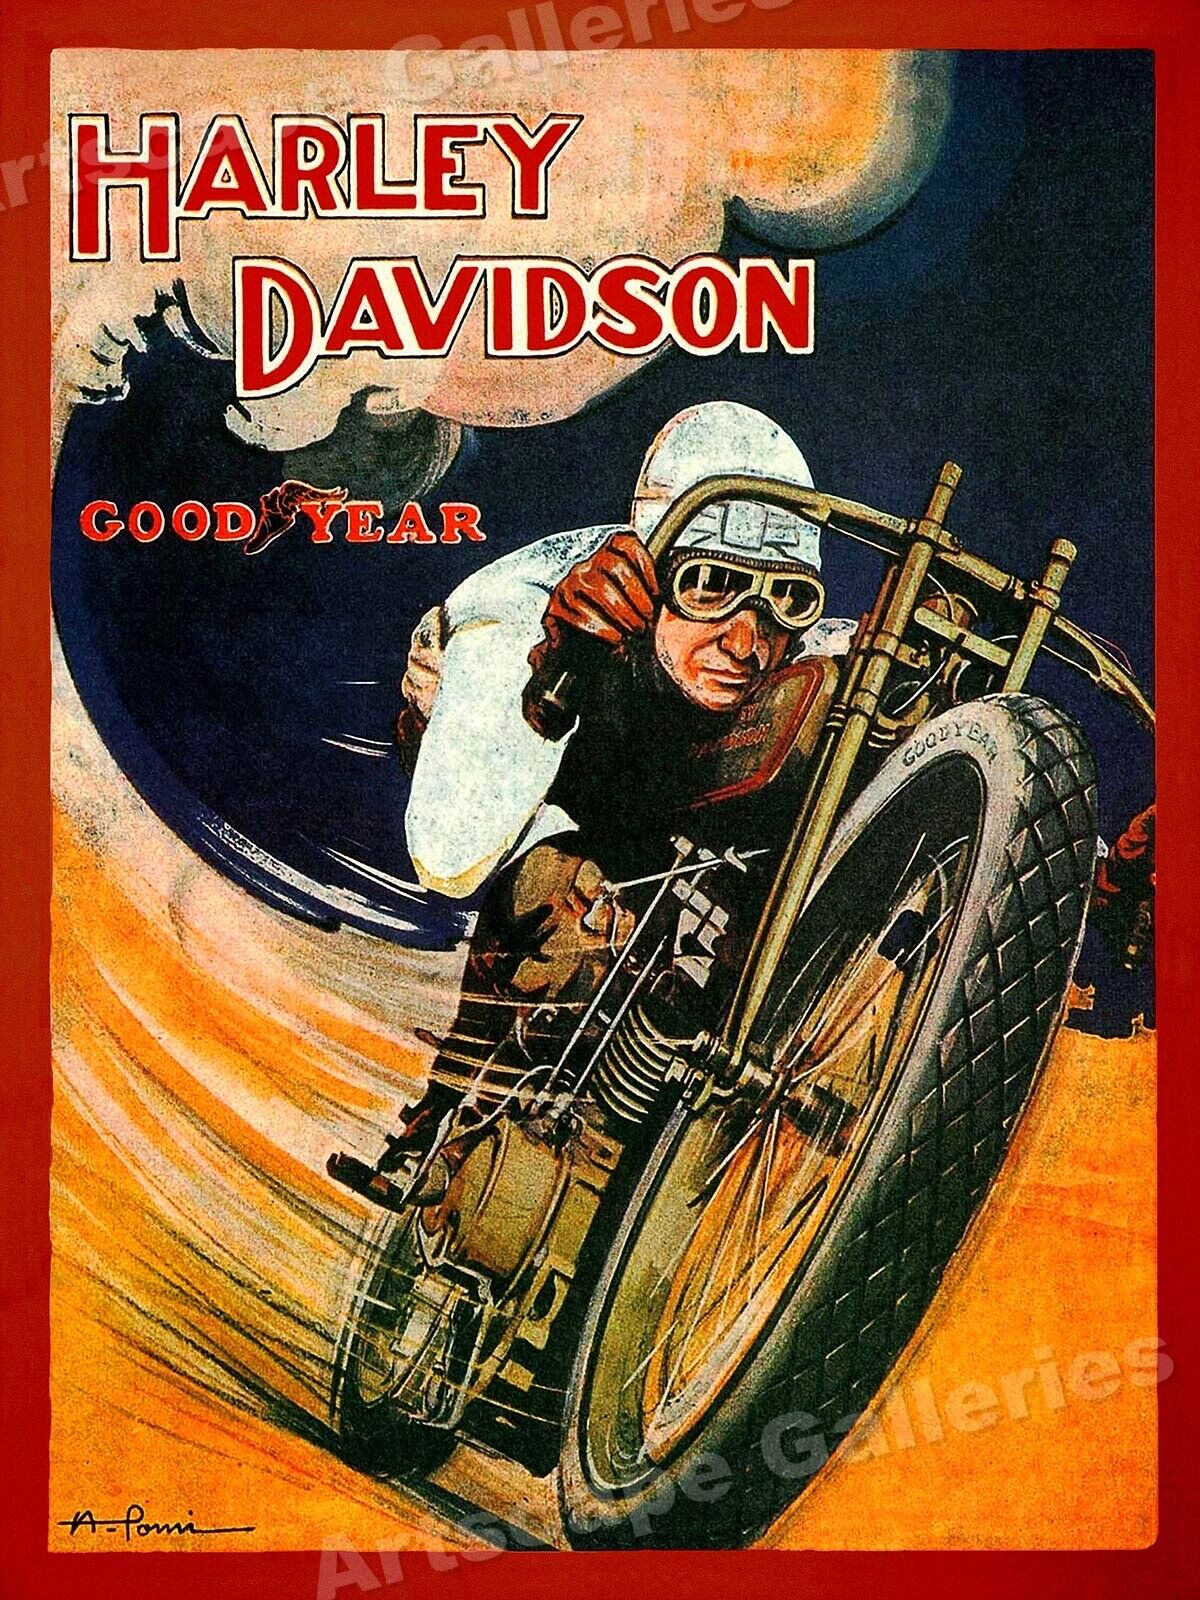 Harley Davidson GoodYear 1920s Classic Motorcycle Racing Poster - 18x24